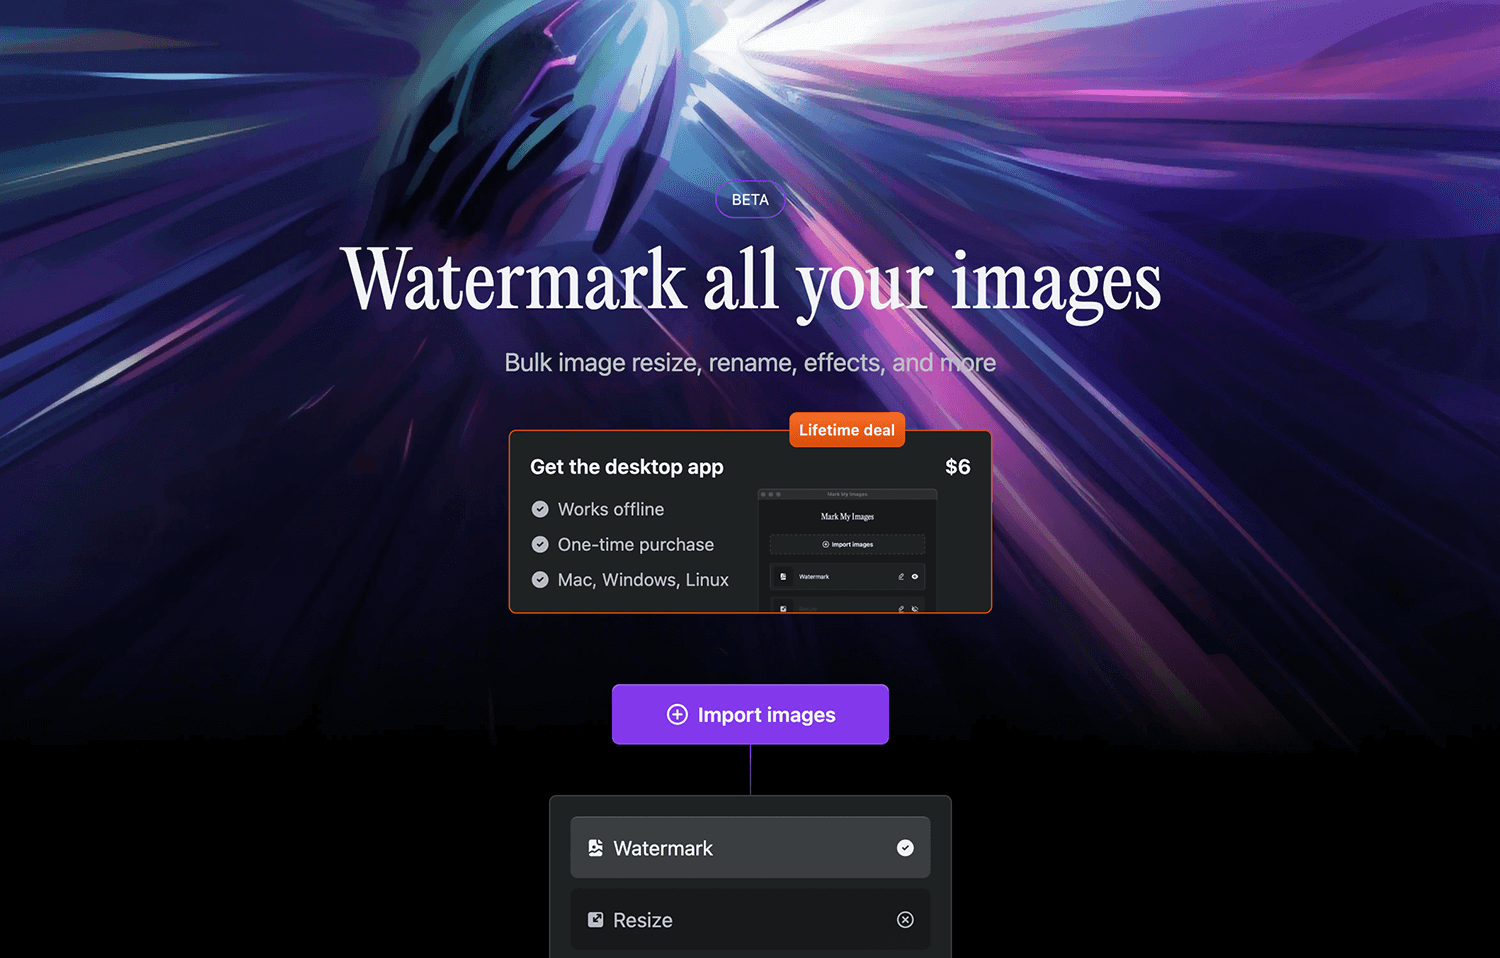 Mark My Images one-page website example with a dark abstract background and a call-to-action to watermark images.